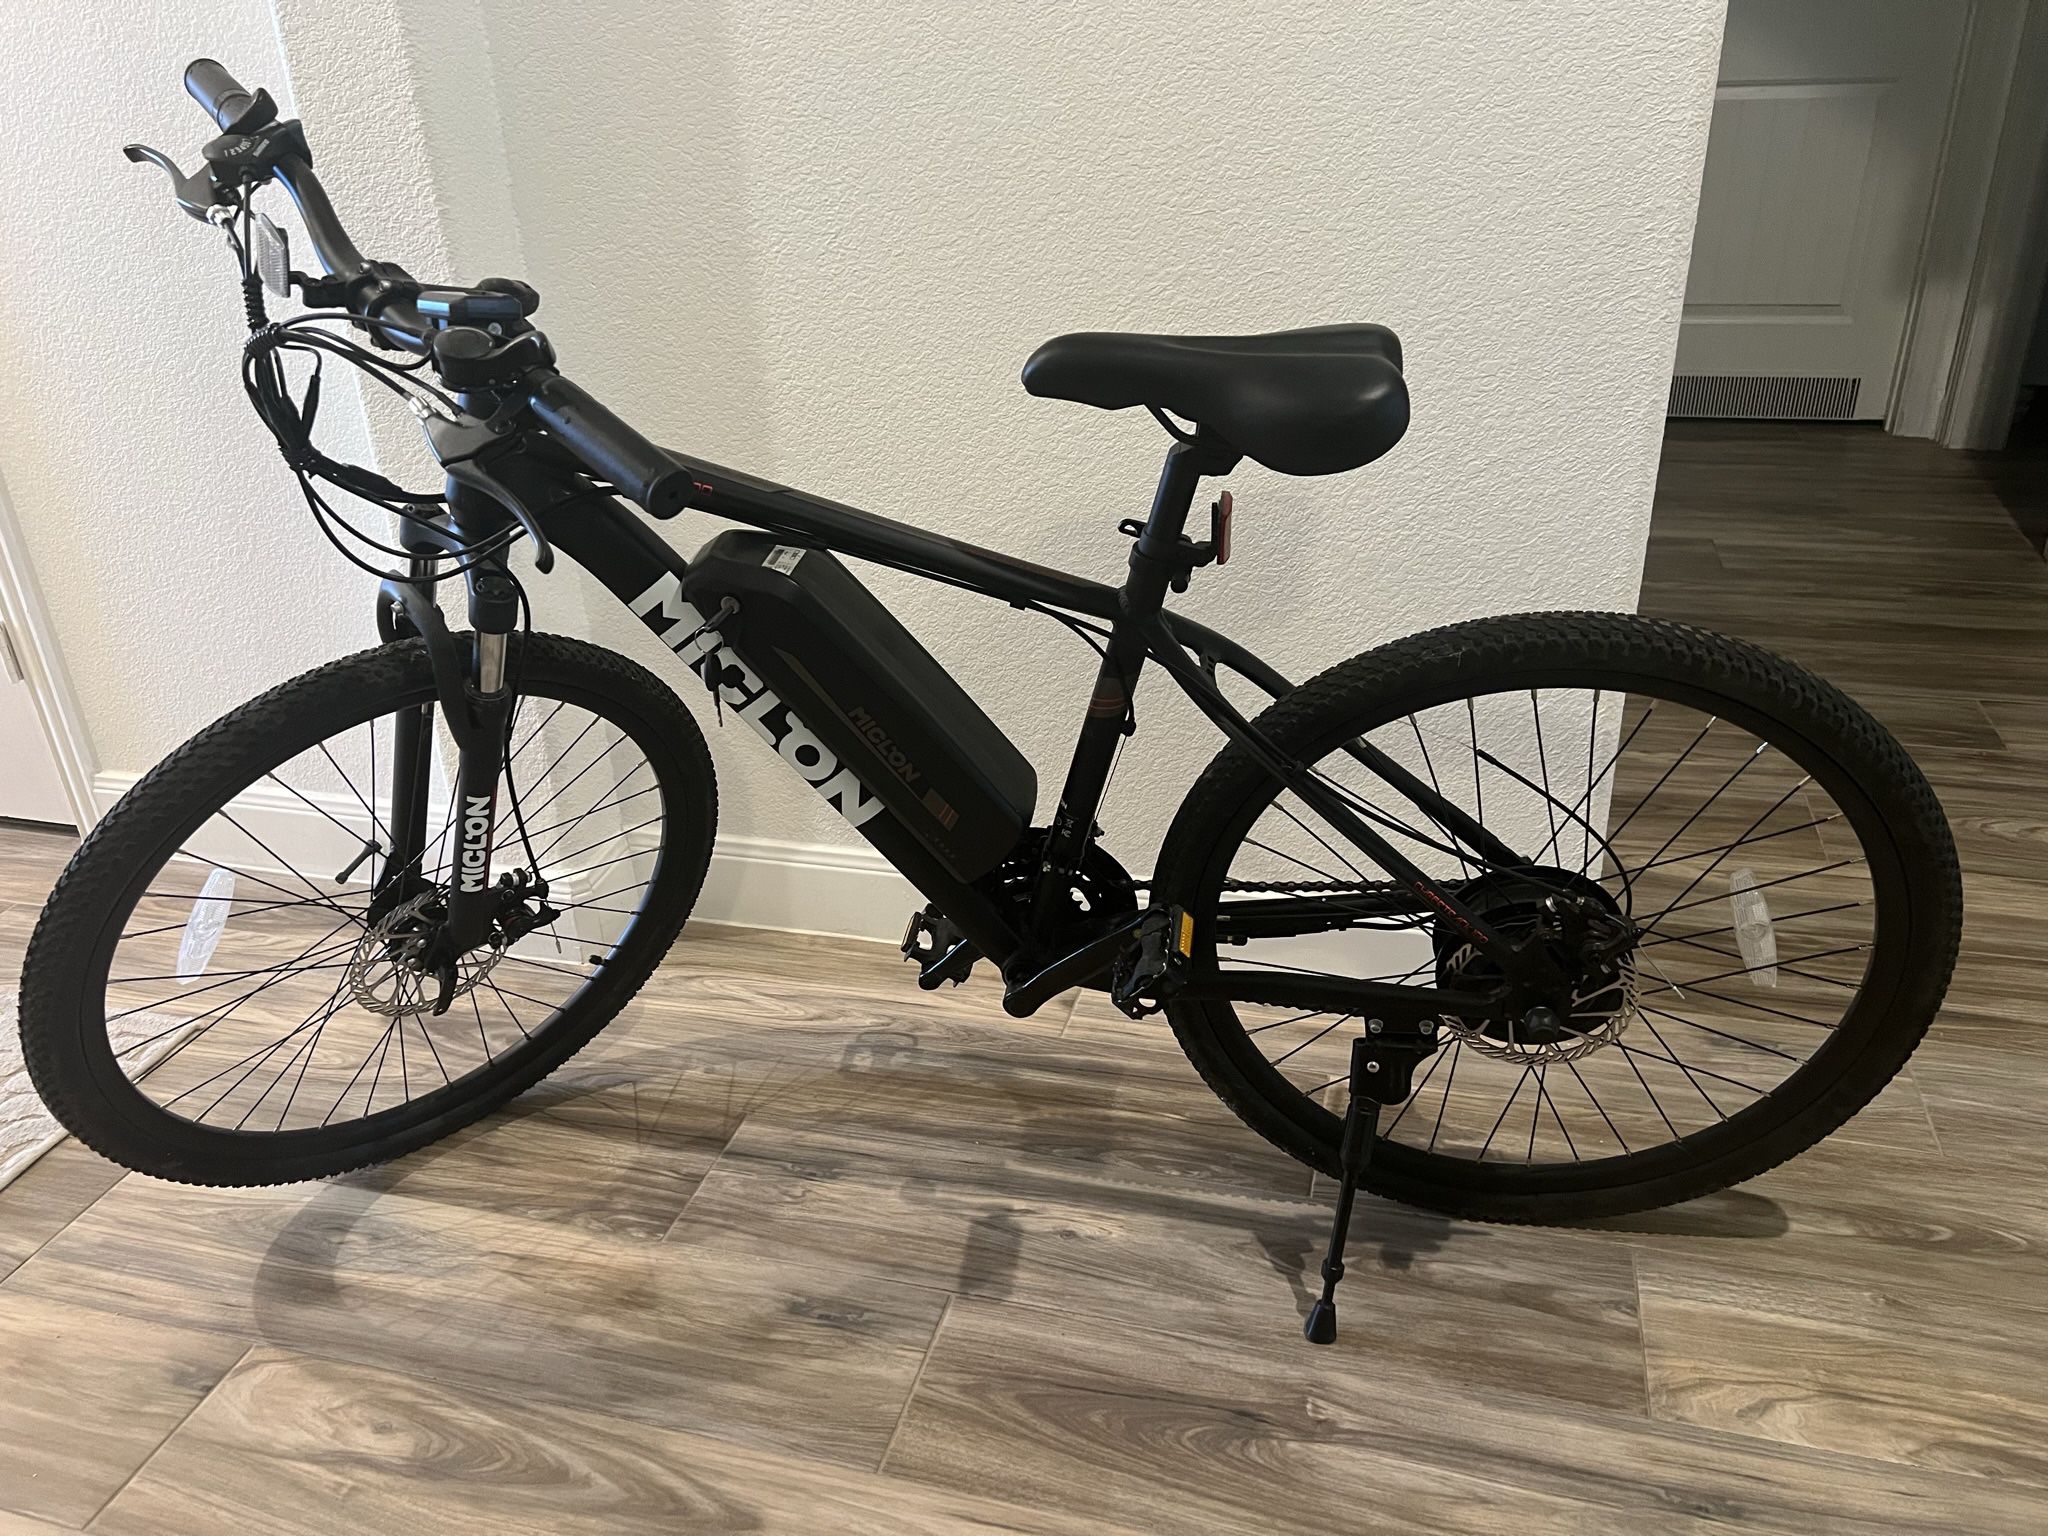 Miclon 26” Electric Bicycle BRAND NEW NEVER RIDDEN